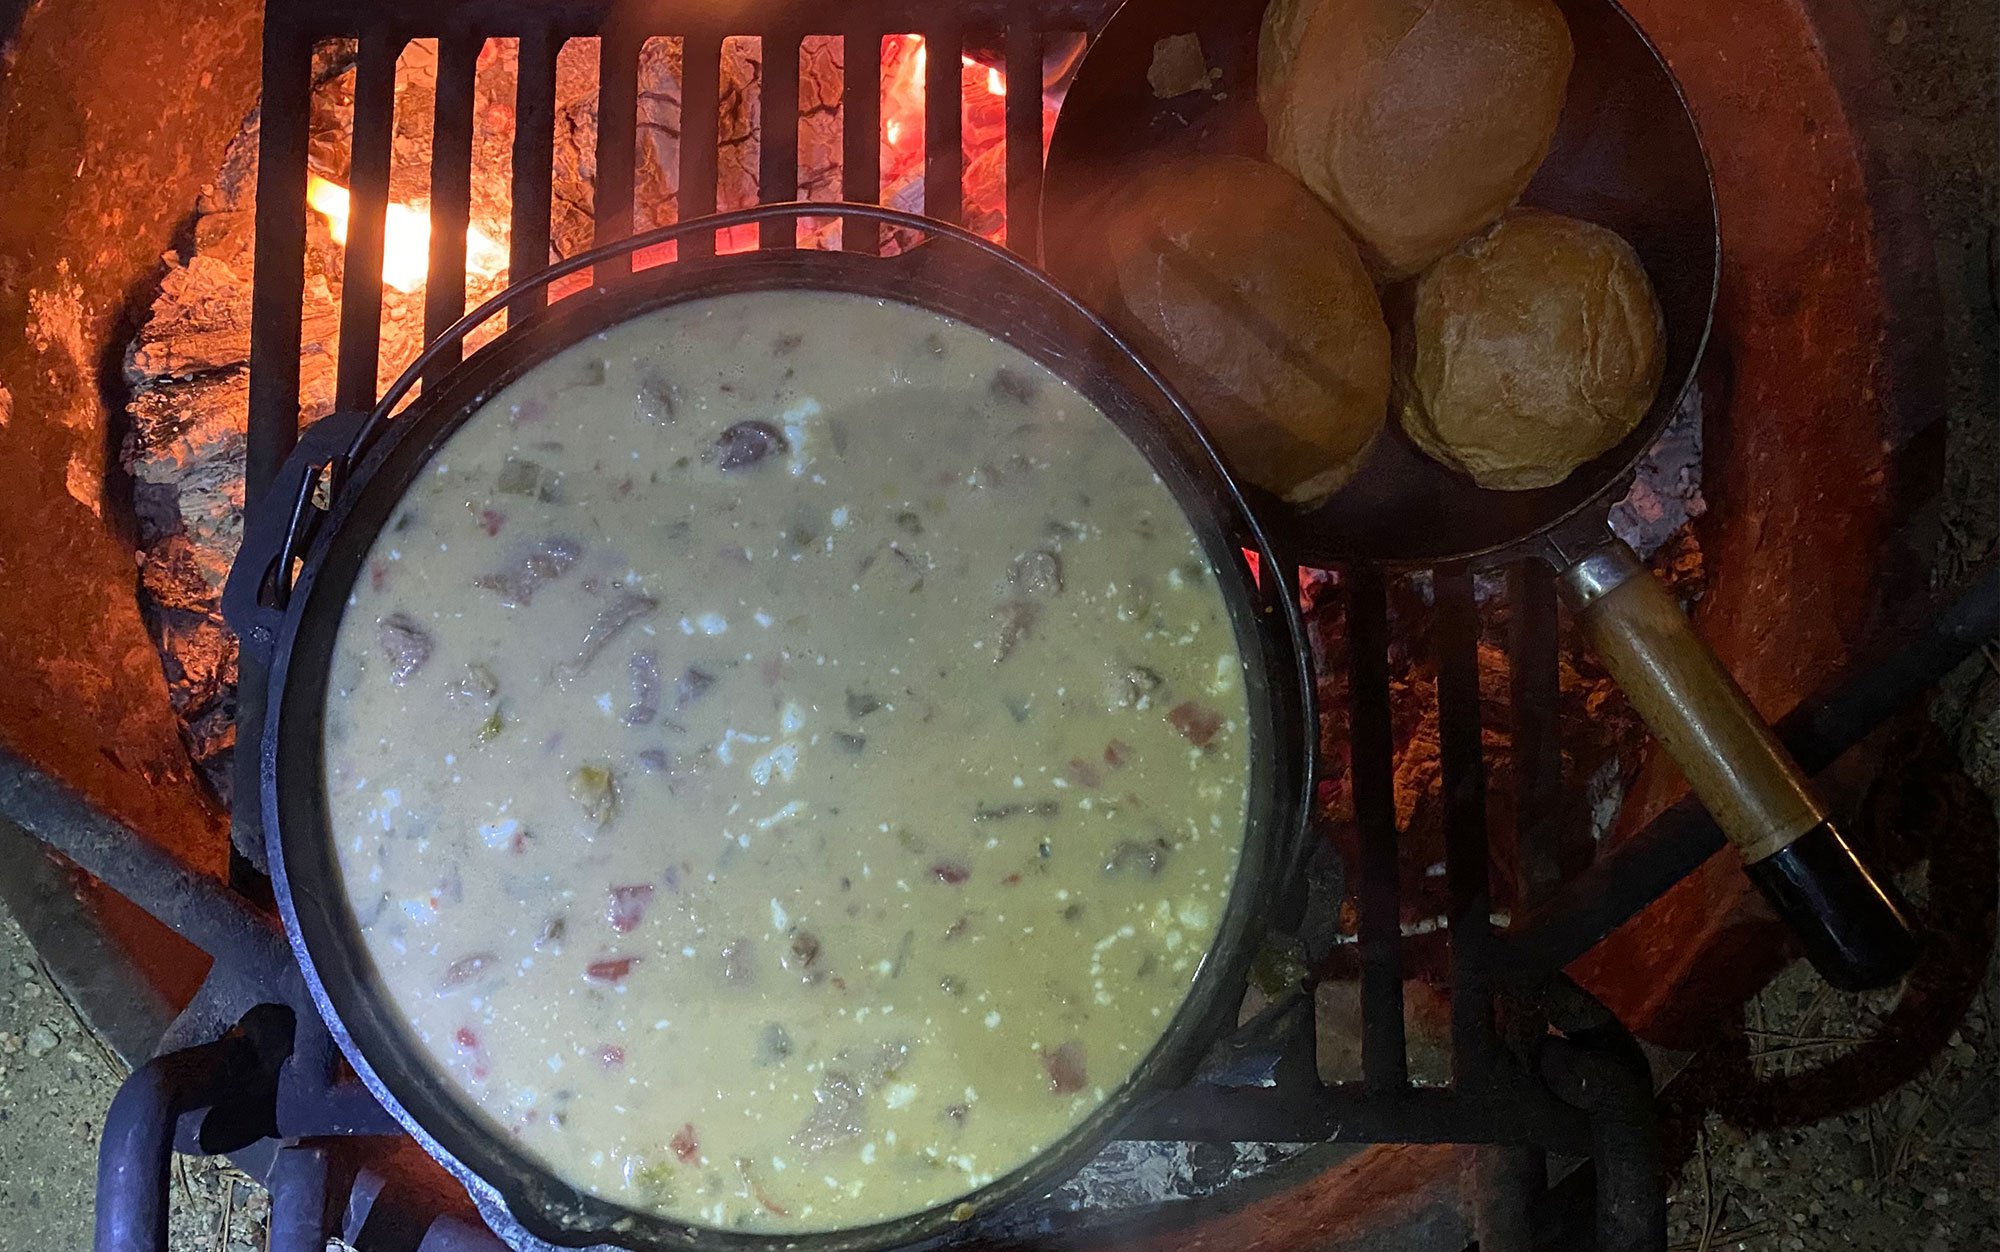 White chicken chili is warm on a cold day outside.